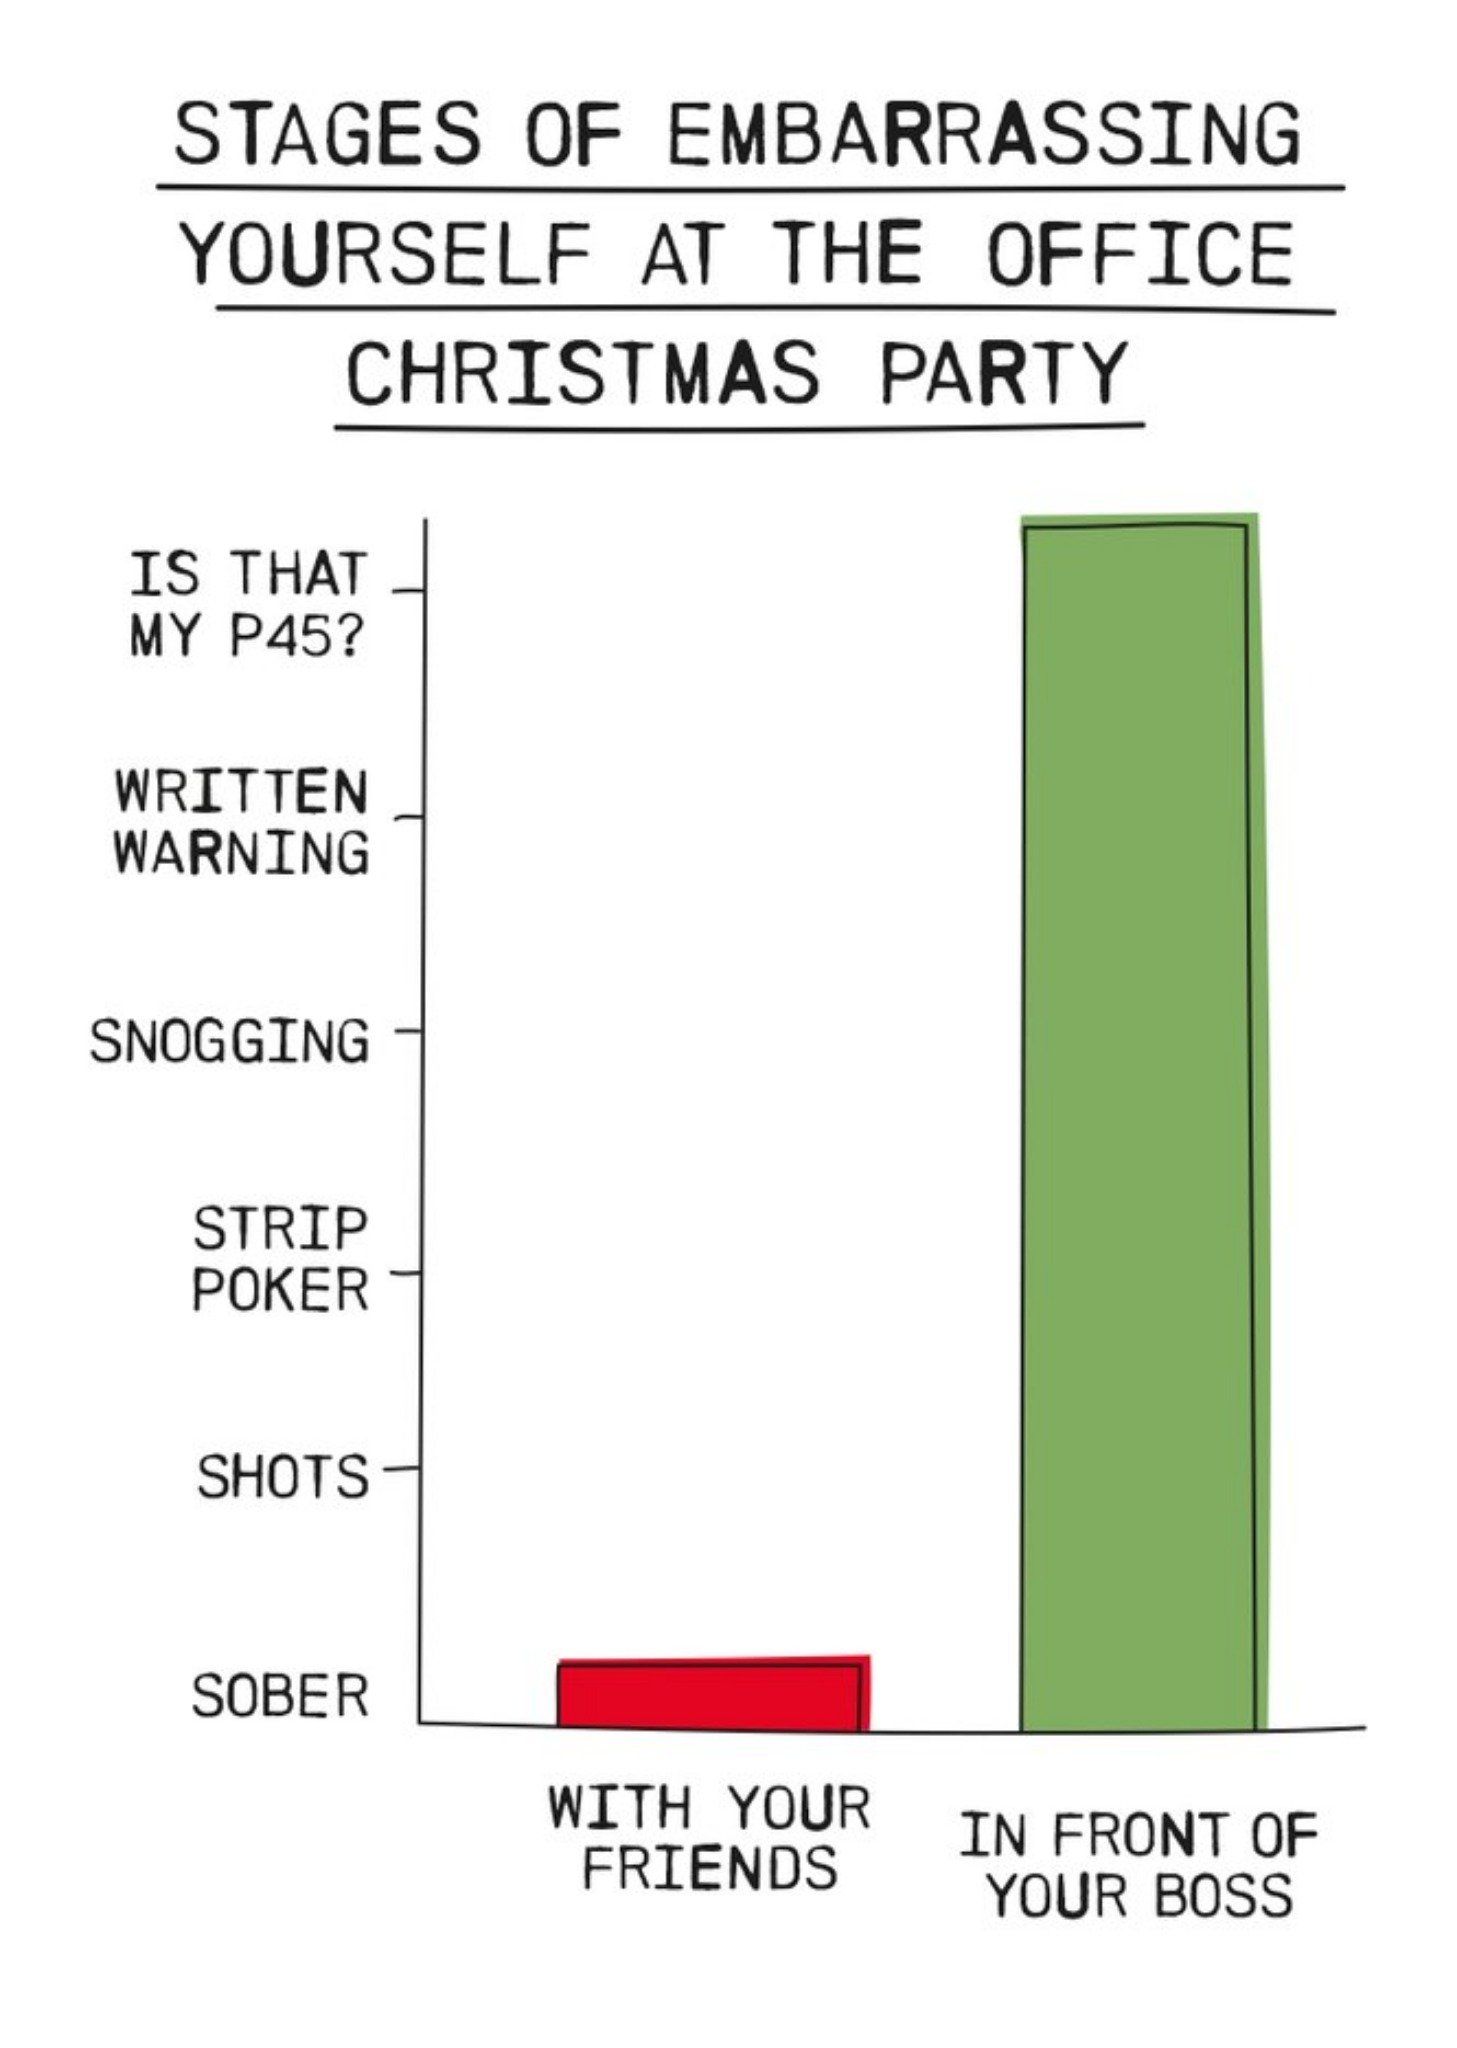 Moonpig Funny Stages Of Embarrassing Yourself At The Ice Christmas Party Bar Chart Card Ecard